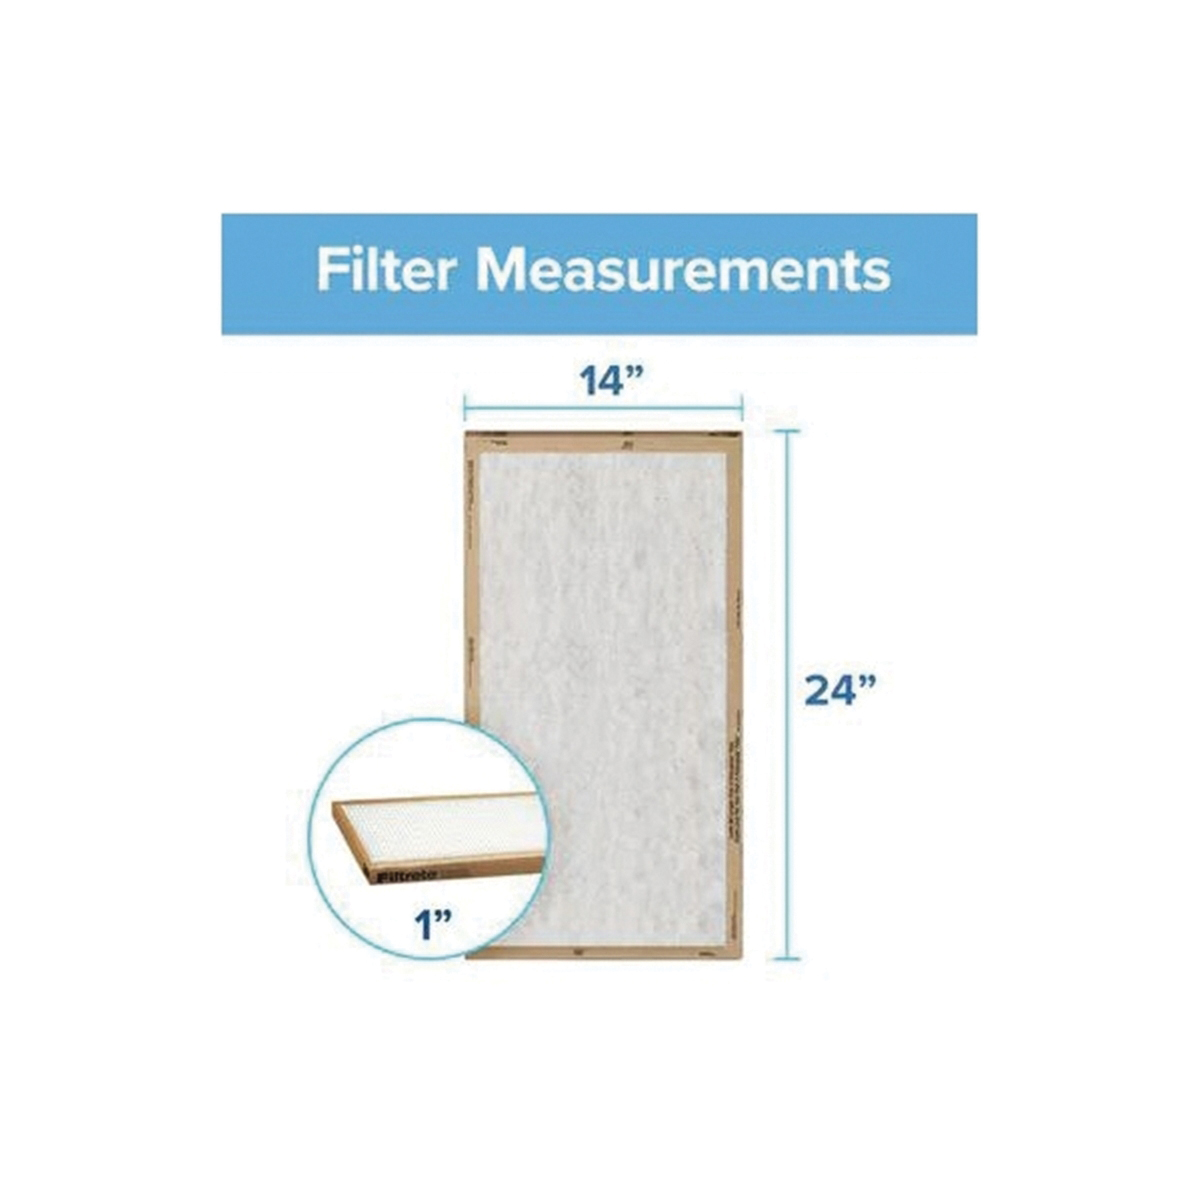 Filtrete FPL23-2PK-24 Air Filter, 24 in L, 14 in W, 2 MERV, For: Air Conditioner, Furnace and HVAC System - 4